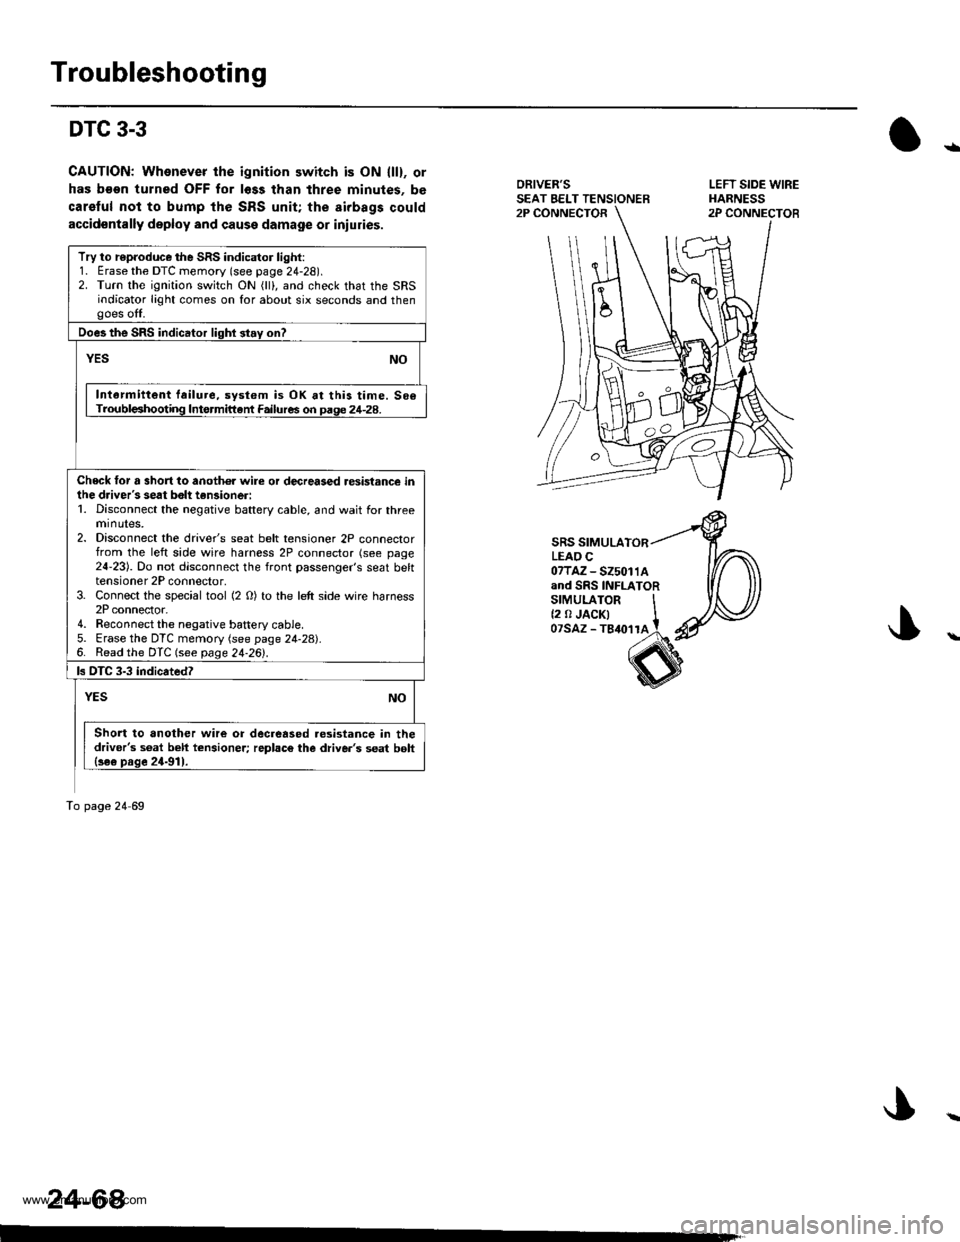 HONDA CR-V 2000 RD1-RD3 / 1.G Workshop Manual 
Troubleshooting
DTC 3-3
CAUTION; Whenever the ignition switch is ON llll, or
has b€on turned OFF for l6ss than three minutes, be
carelul not to bump the SRS unit; the airbags could
accidontally dep